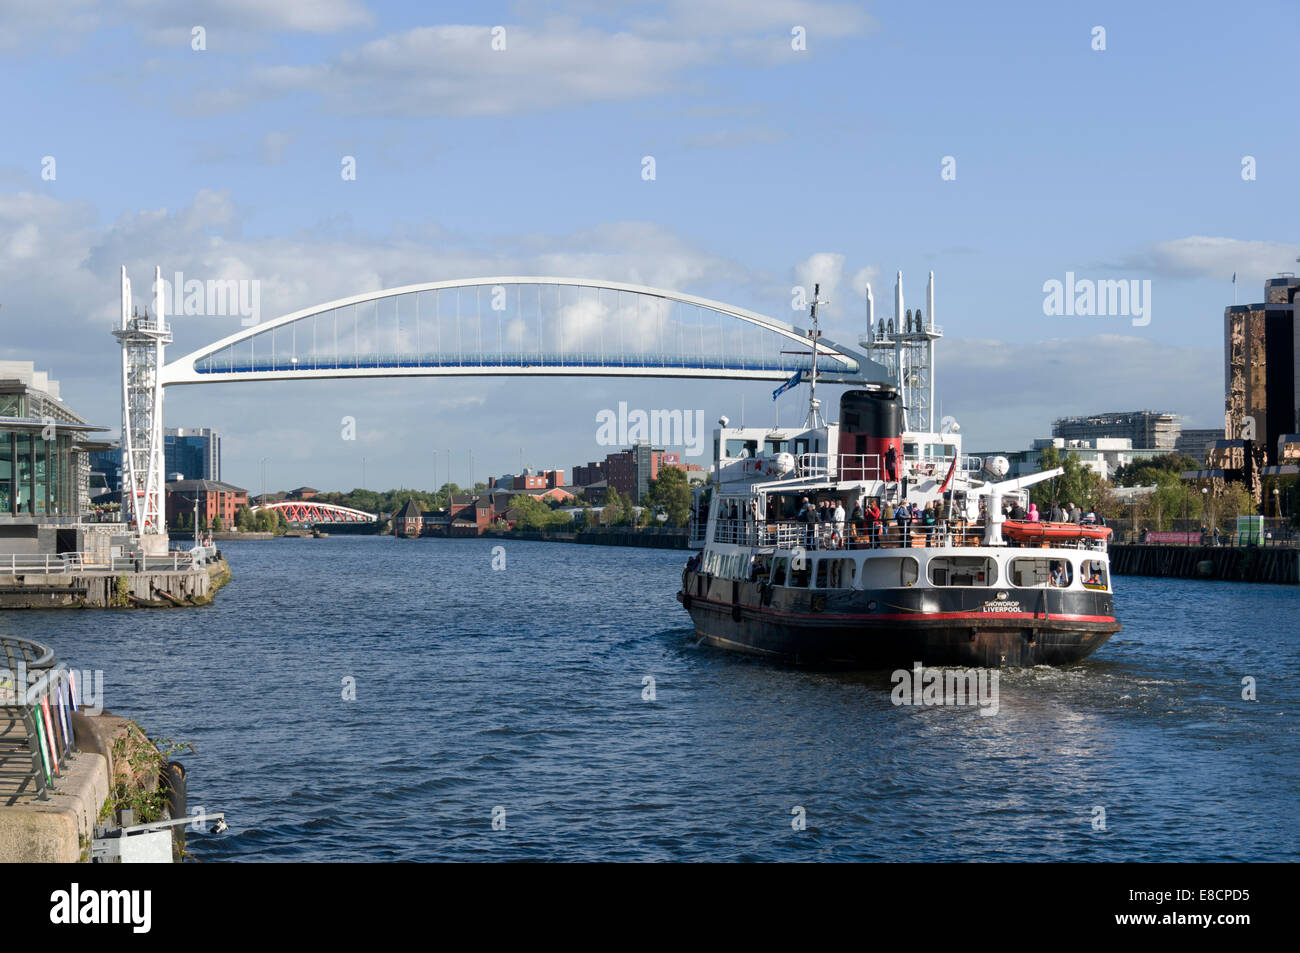 Mersey Ferries 'Manchester Ship Canal Cruise' boat, the 'Snowdrop', arriving at Salford Quays, Manchester, England, UK Stock Photo